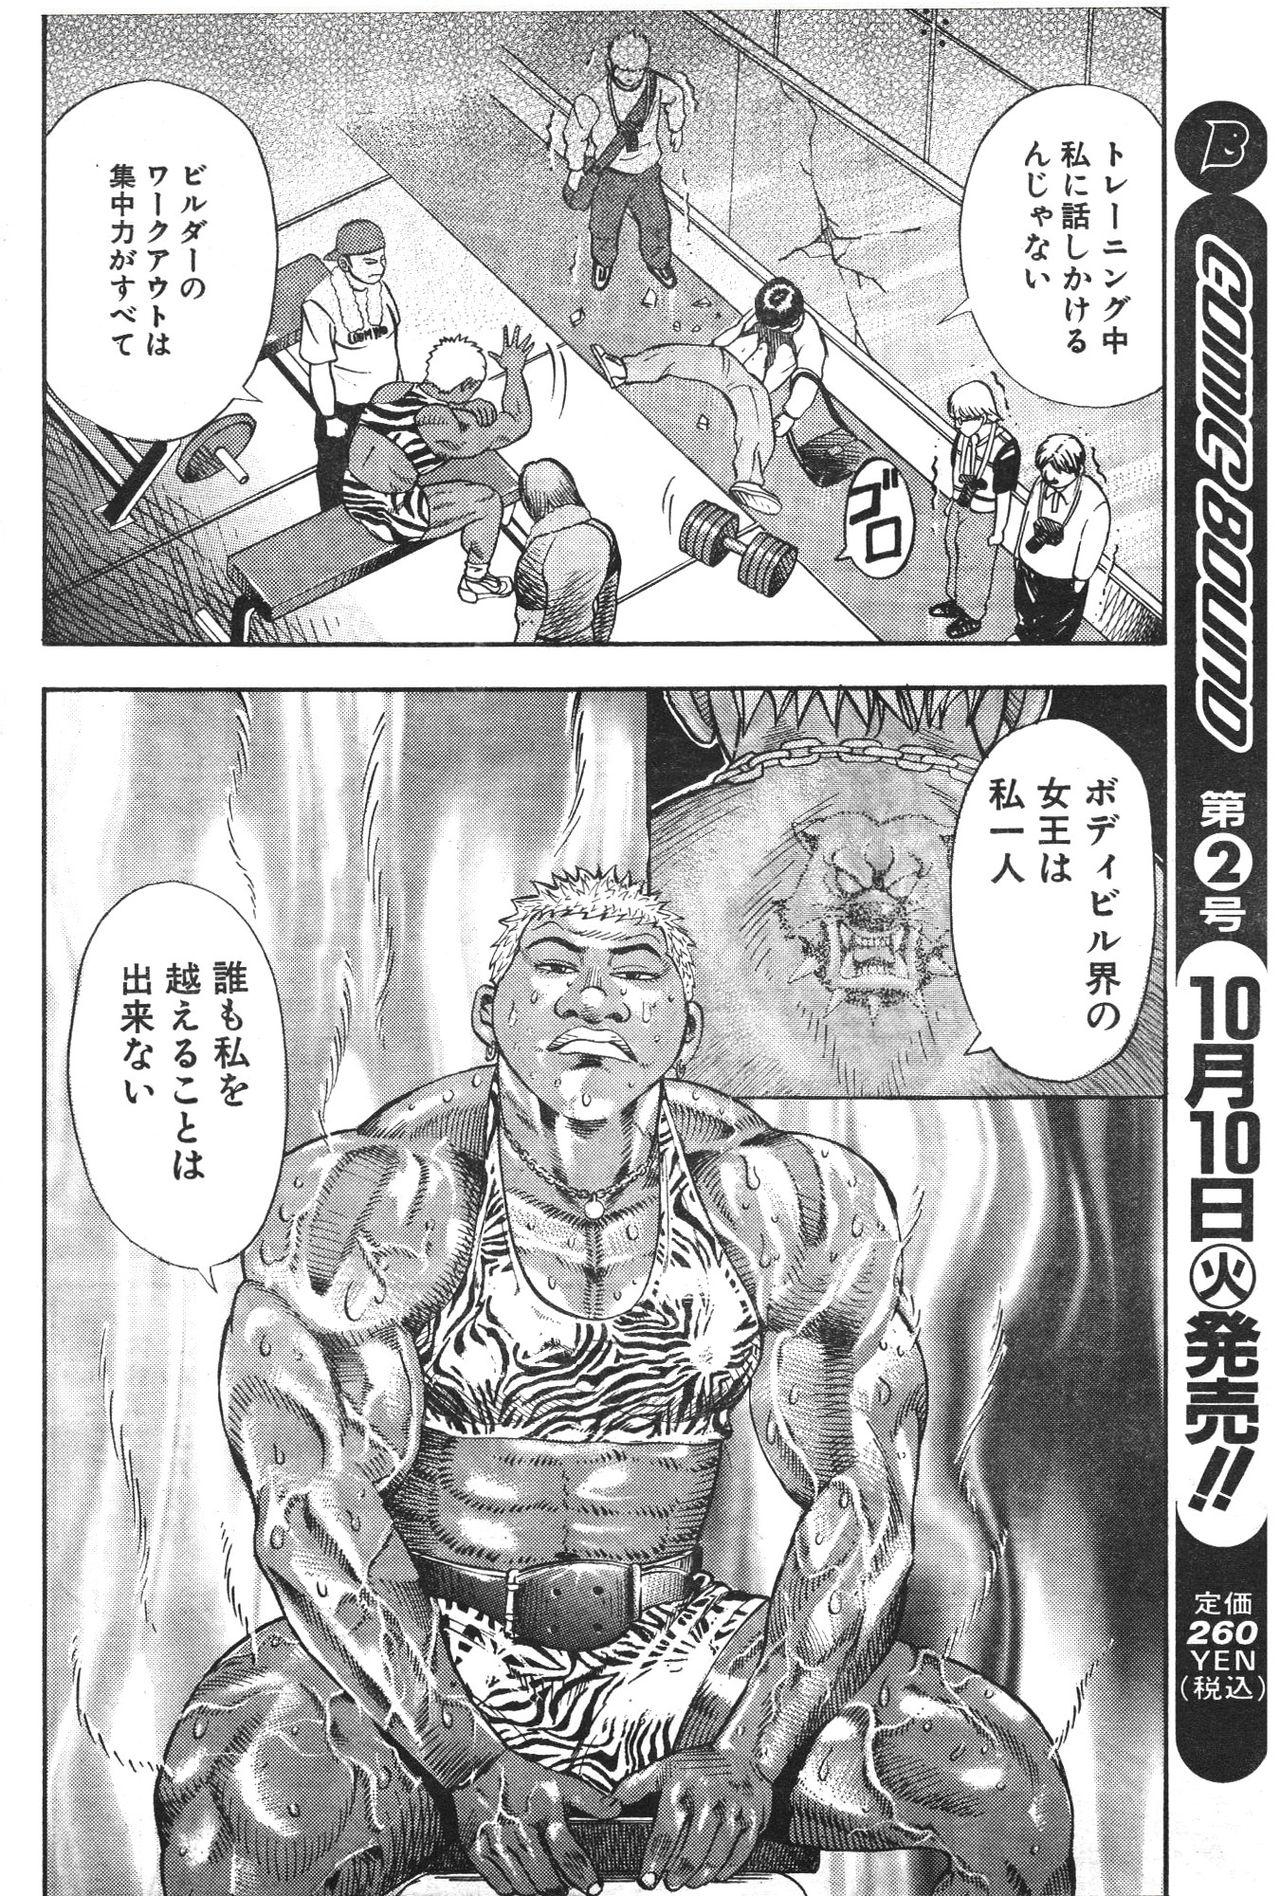 Muscle Strawberry Chapter 1 3